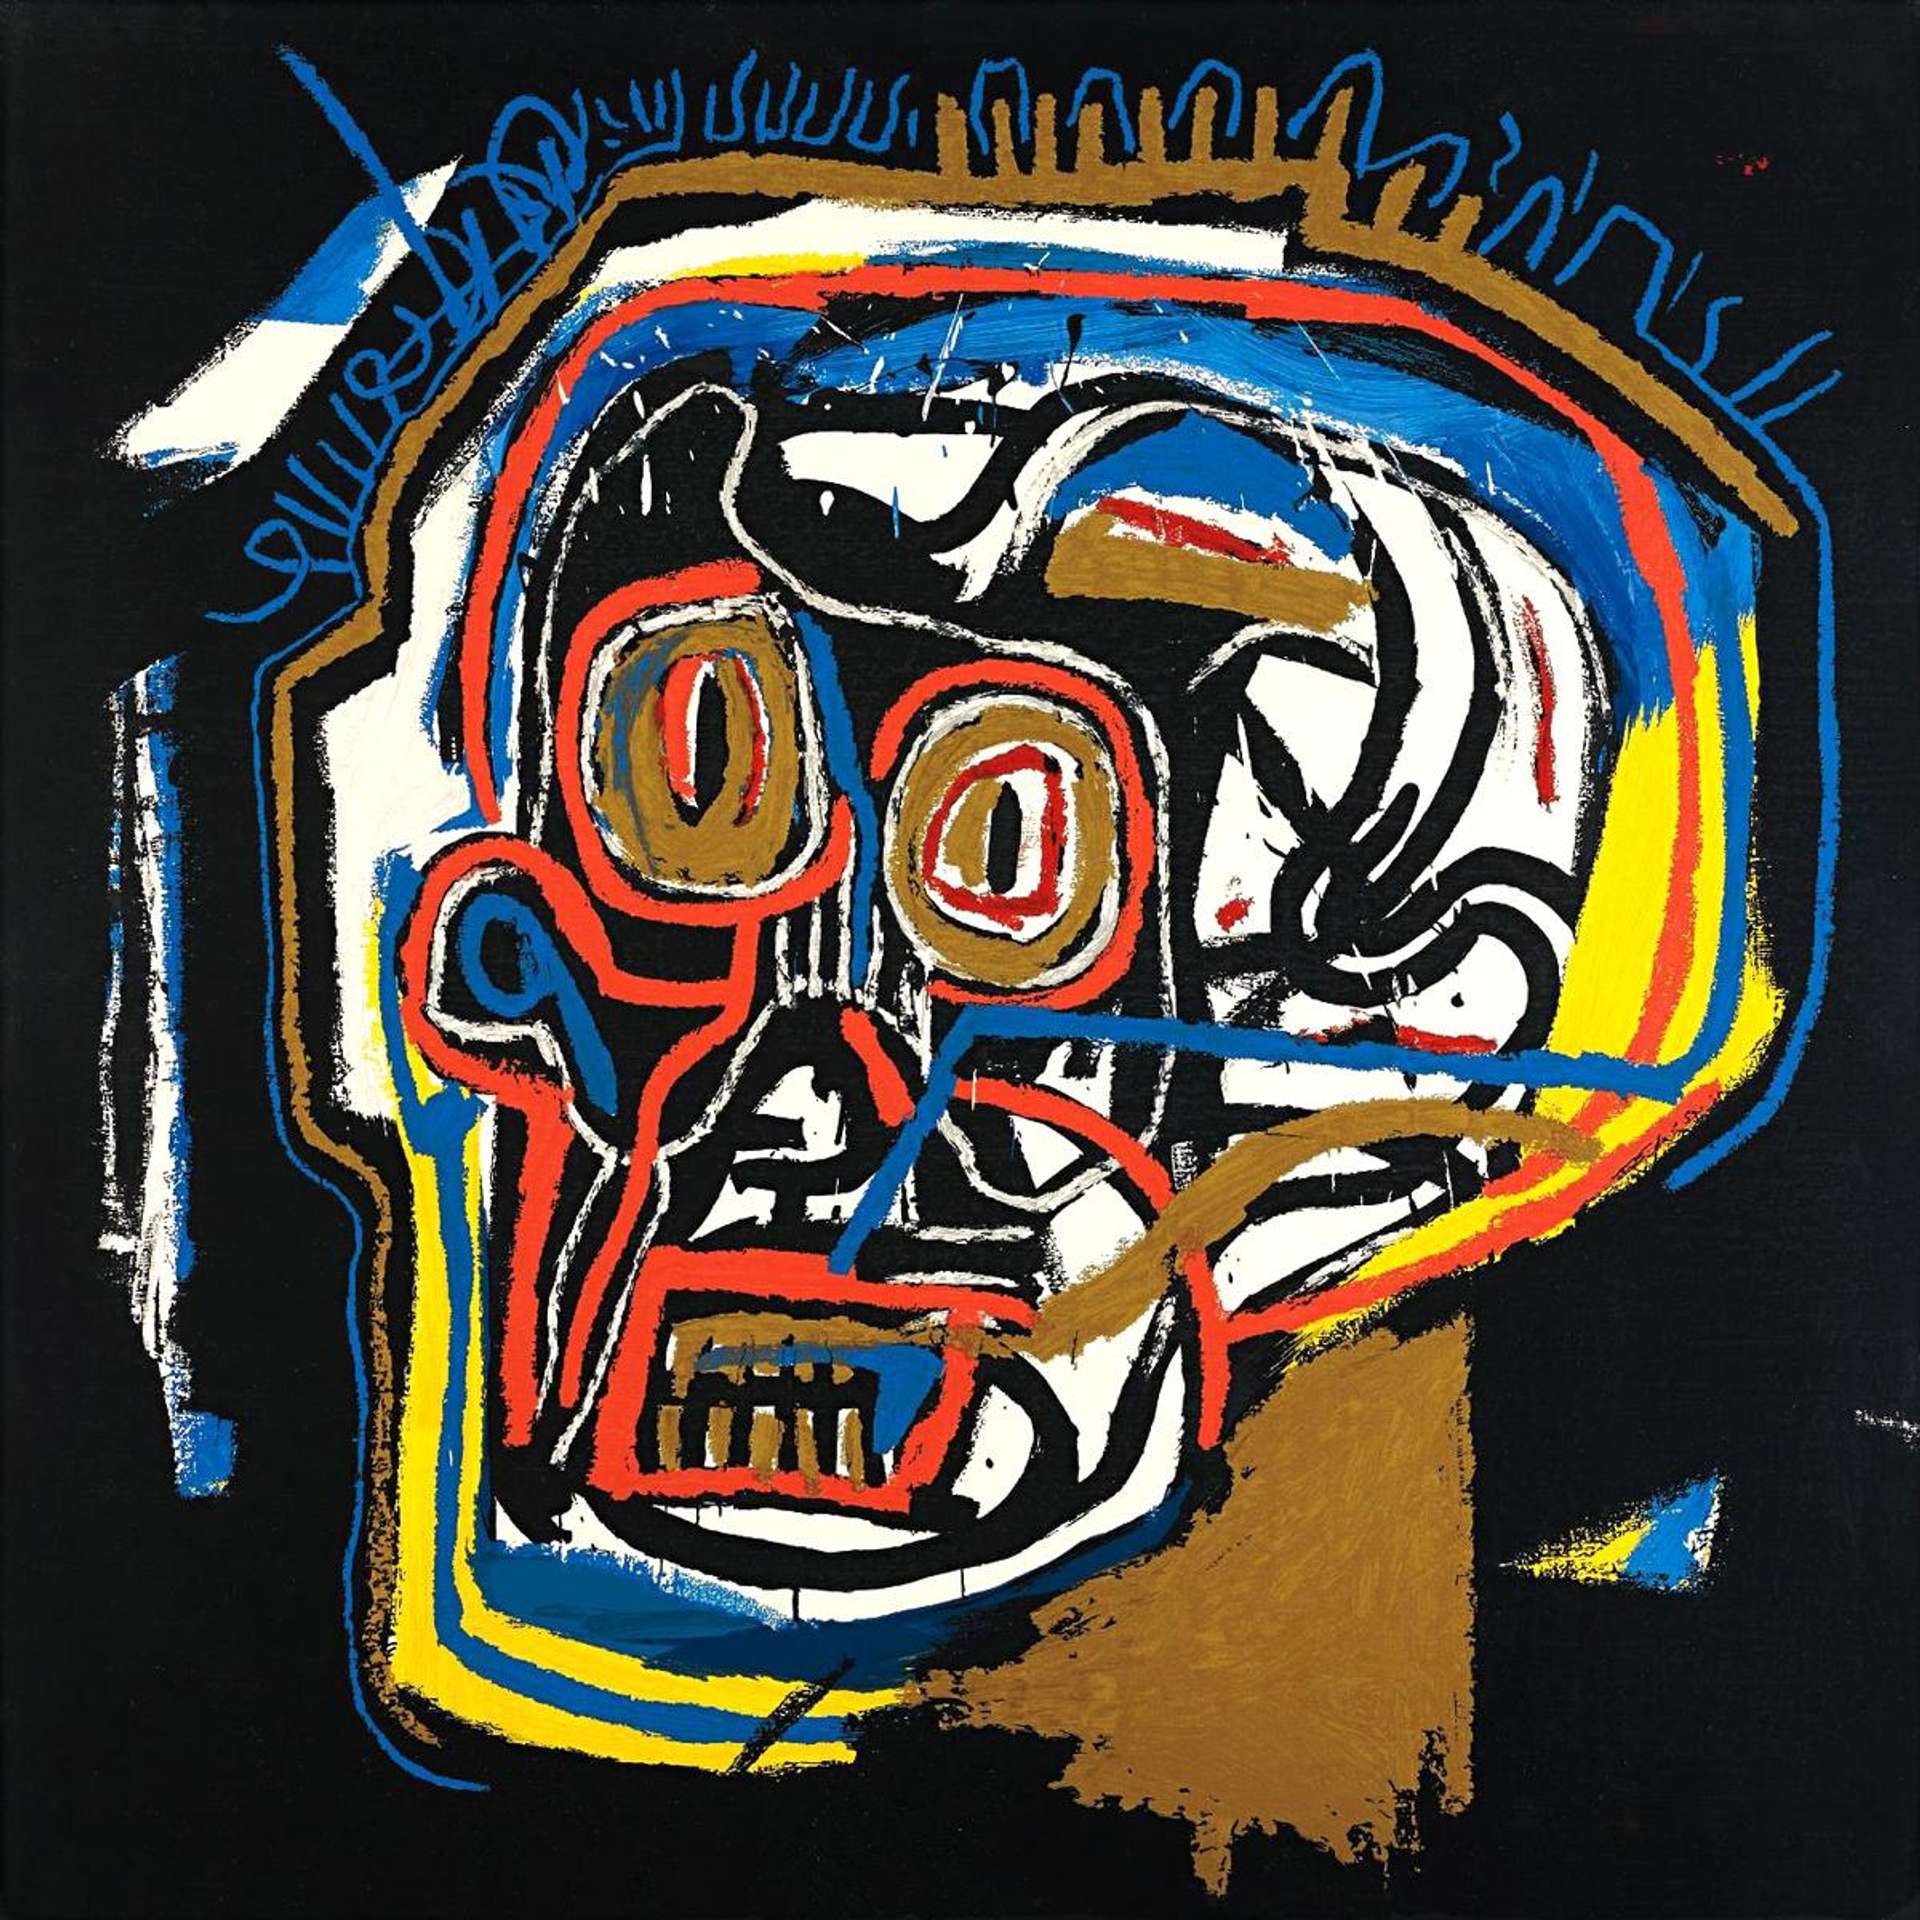 This image of this signed print is a visceral example of Basquiat’s imaginative blurring of the boundary between the internal and external body. At the same time that we see an outline of the certain features of the face, including the mouth and the ears, there is a void where the nose would usually be, suggesting a skull.